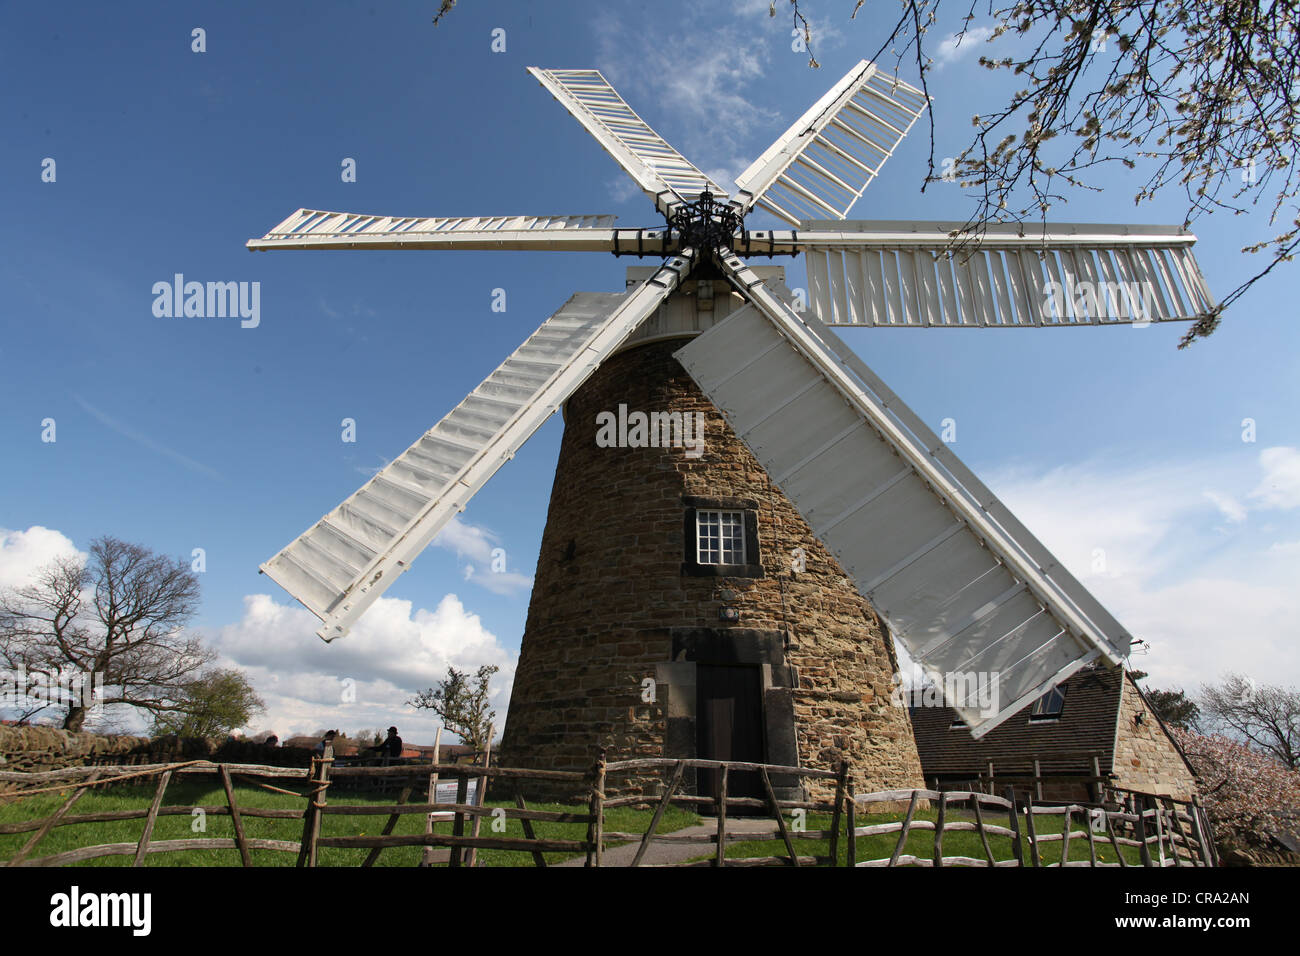 Heage Working Windmill in the Derbyshire Peak District Stock Photo